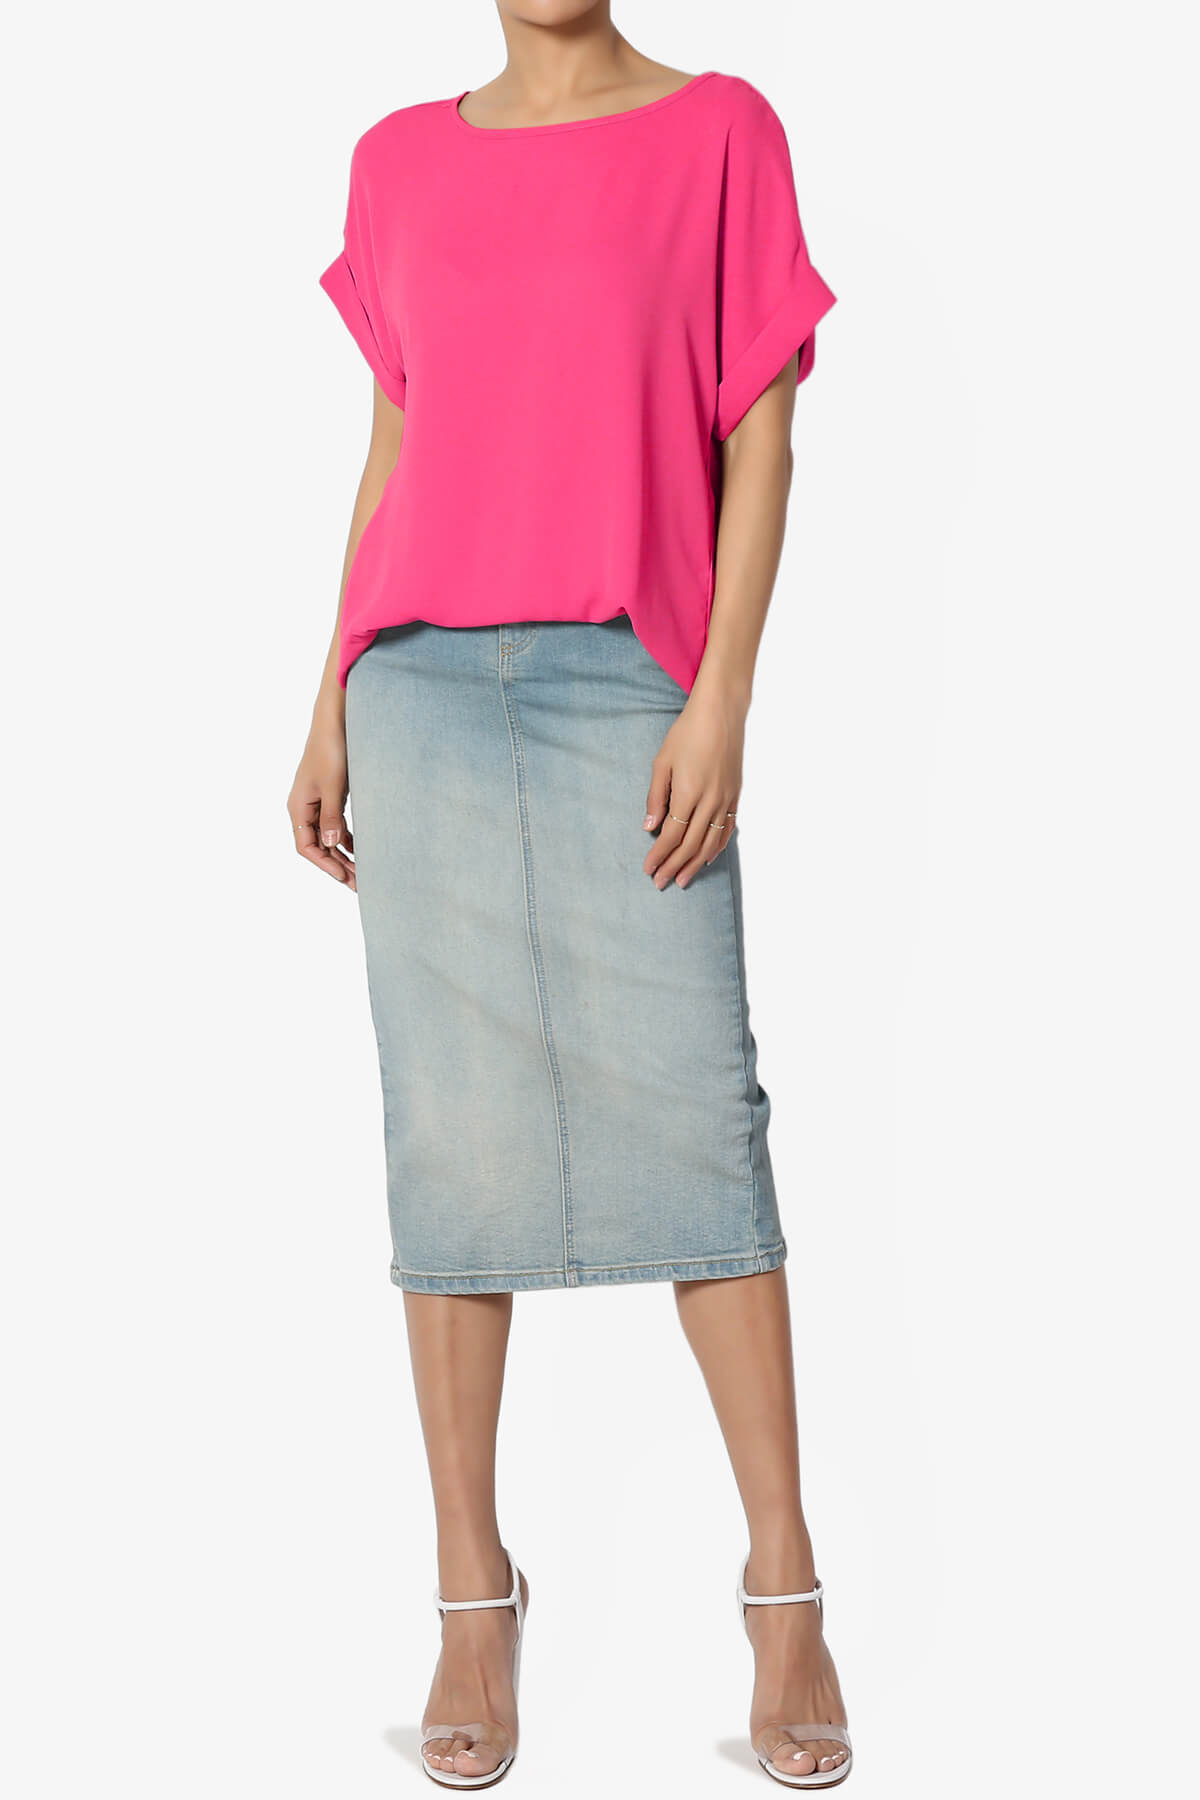 Load image into Gallery viewer, Juliette Boat Neck Chiffon Top HOT PINK_6
